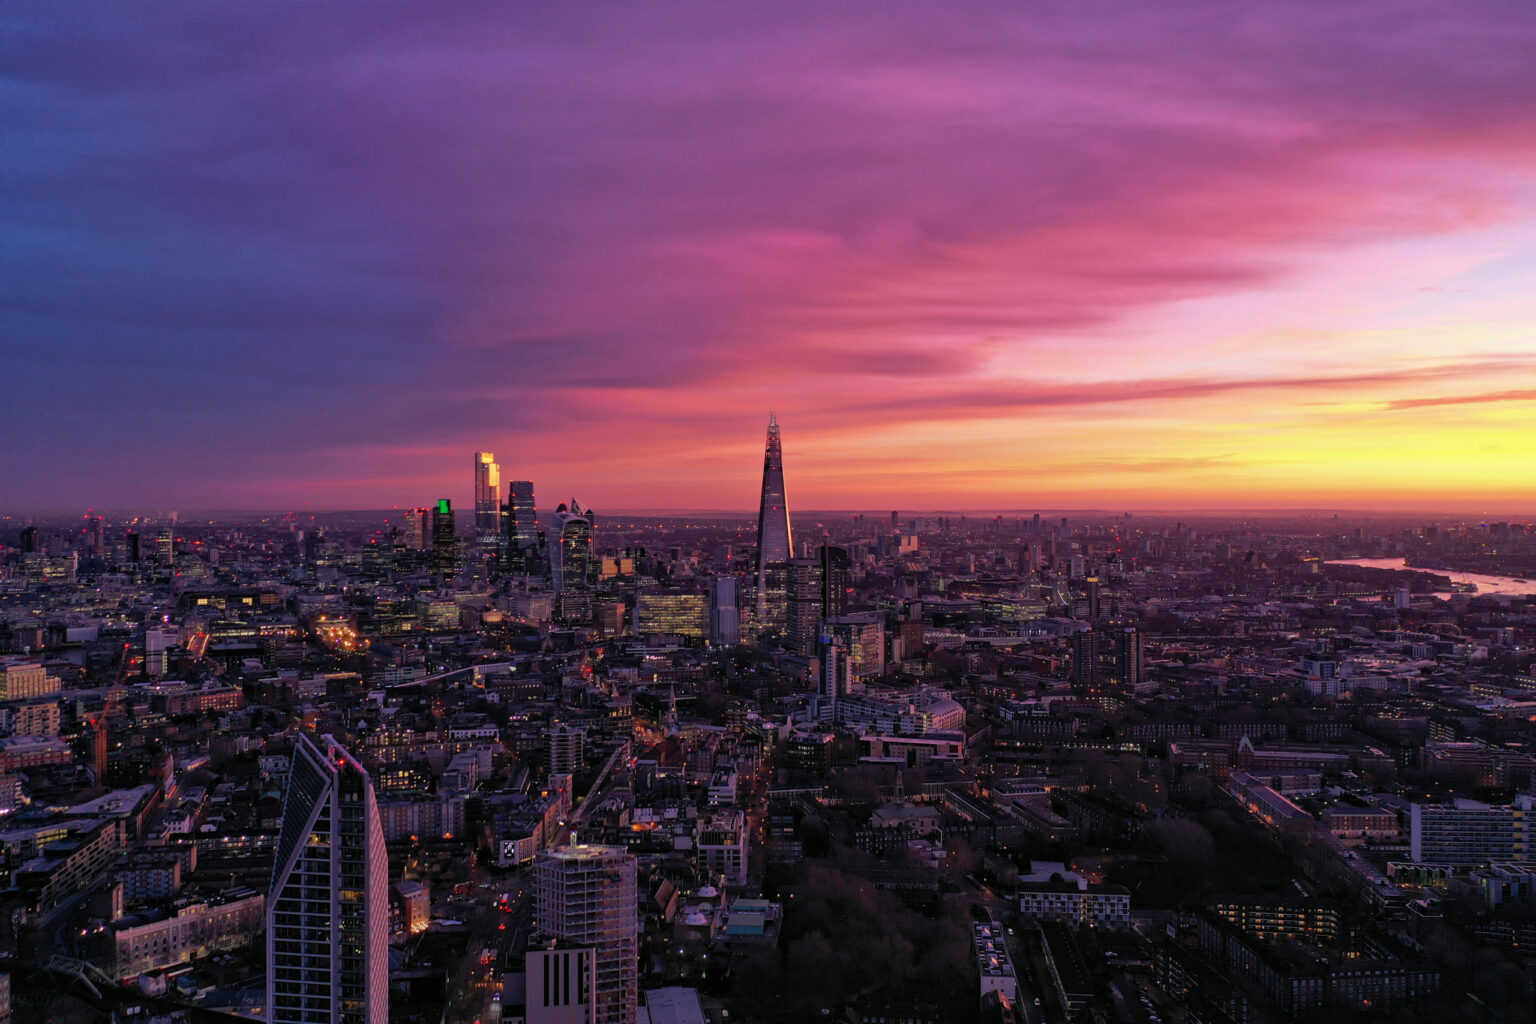 Photo,Shows,Beautiful,Sunrise,At,London,Where,The,Sky,Is